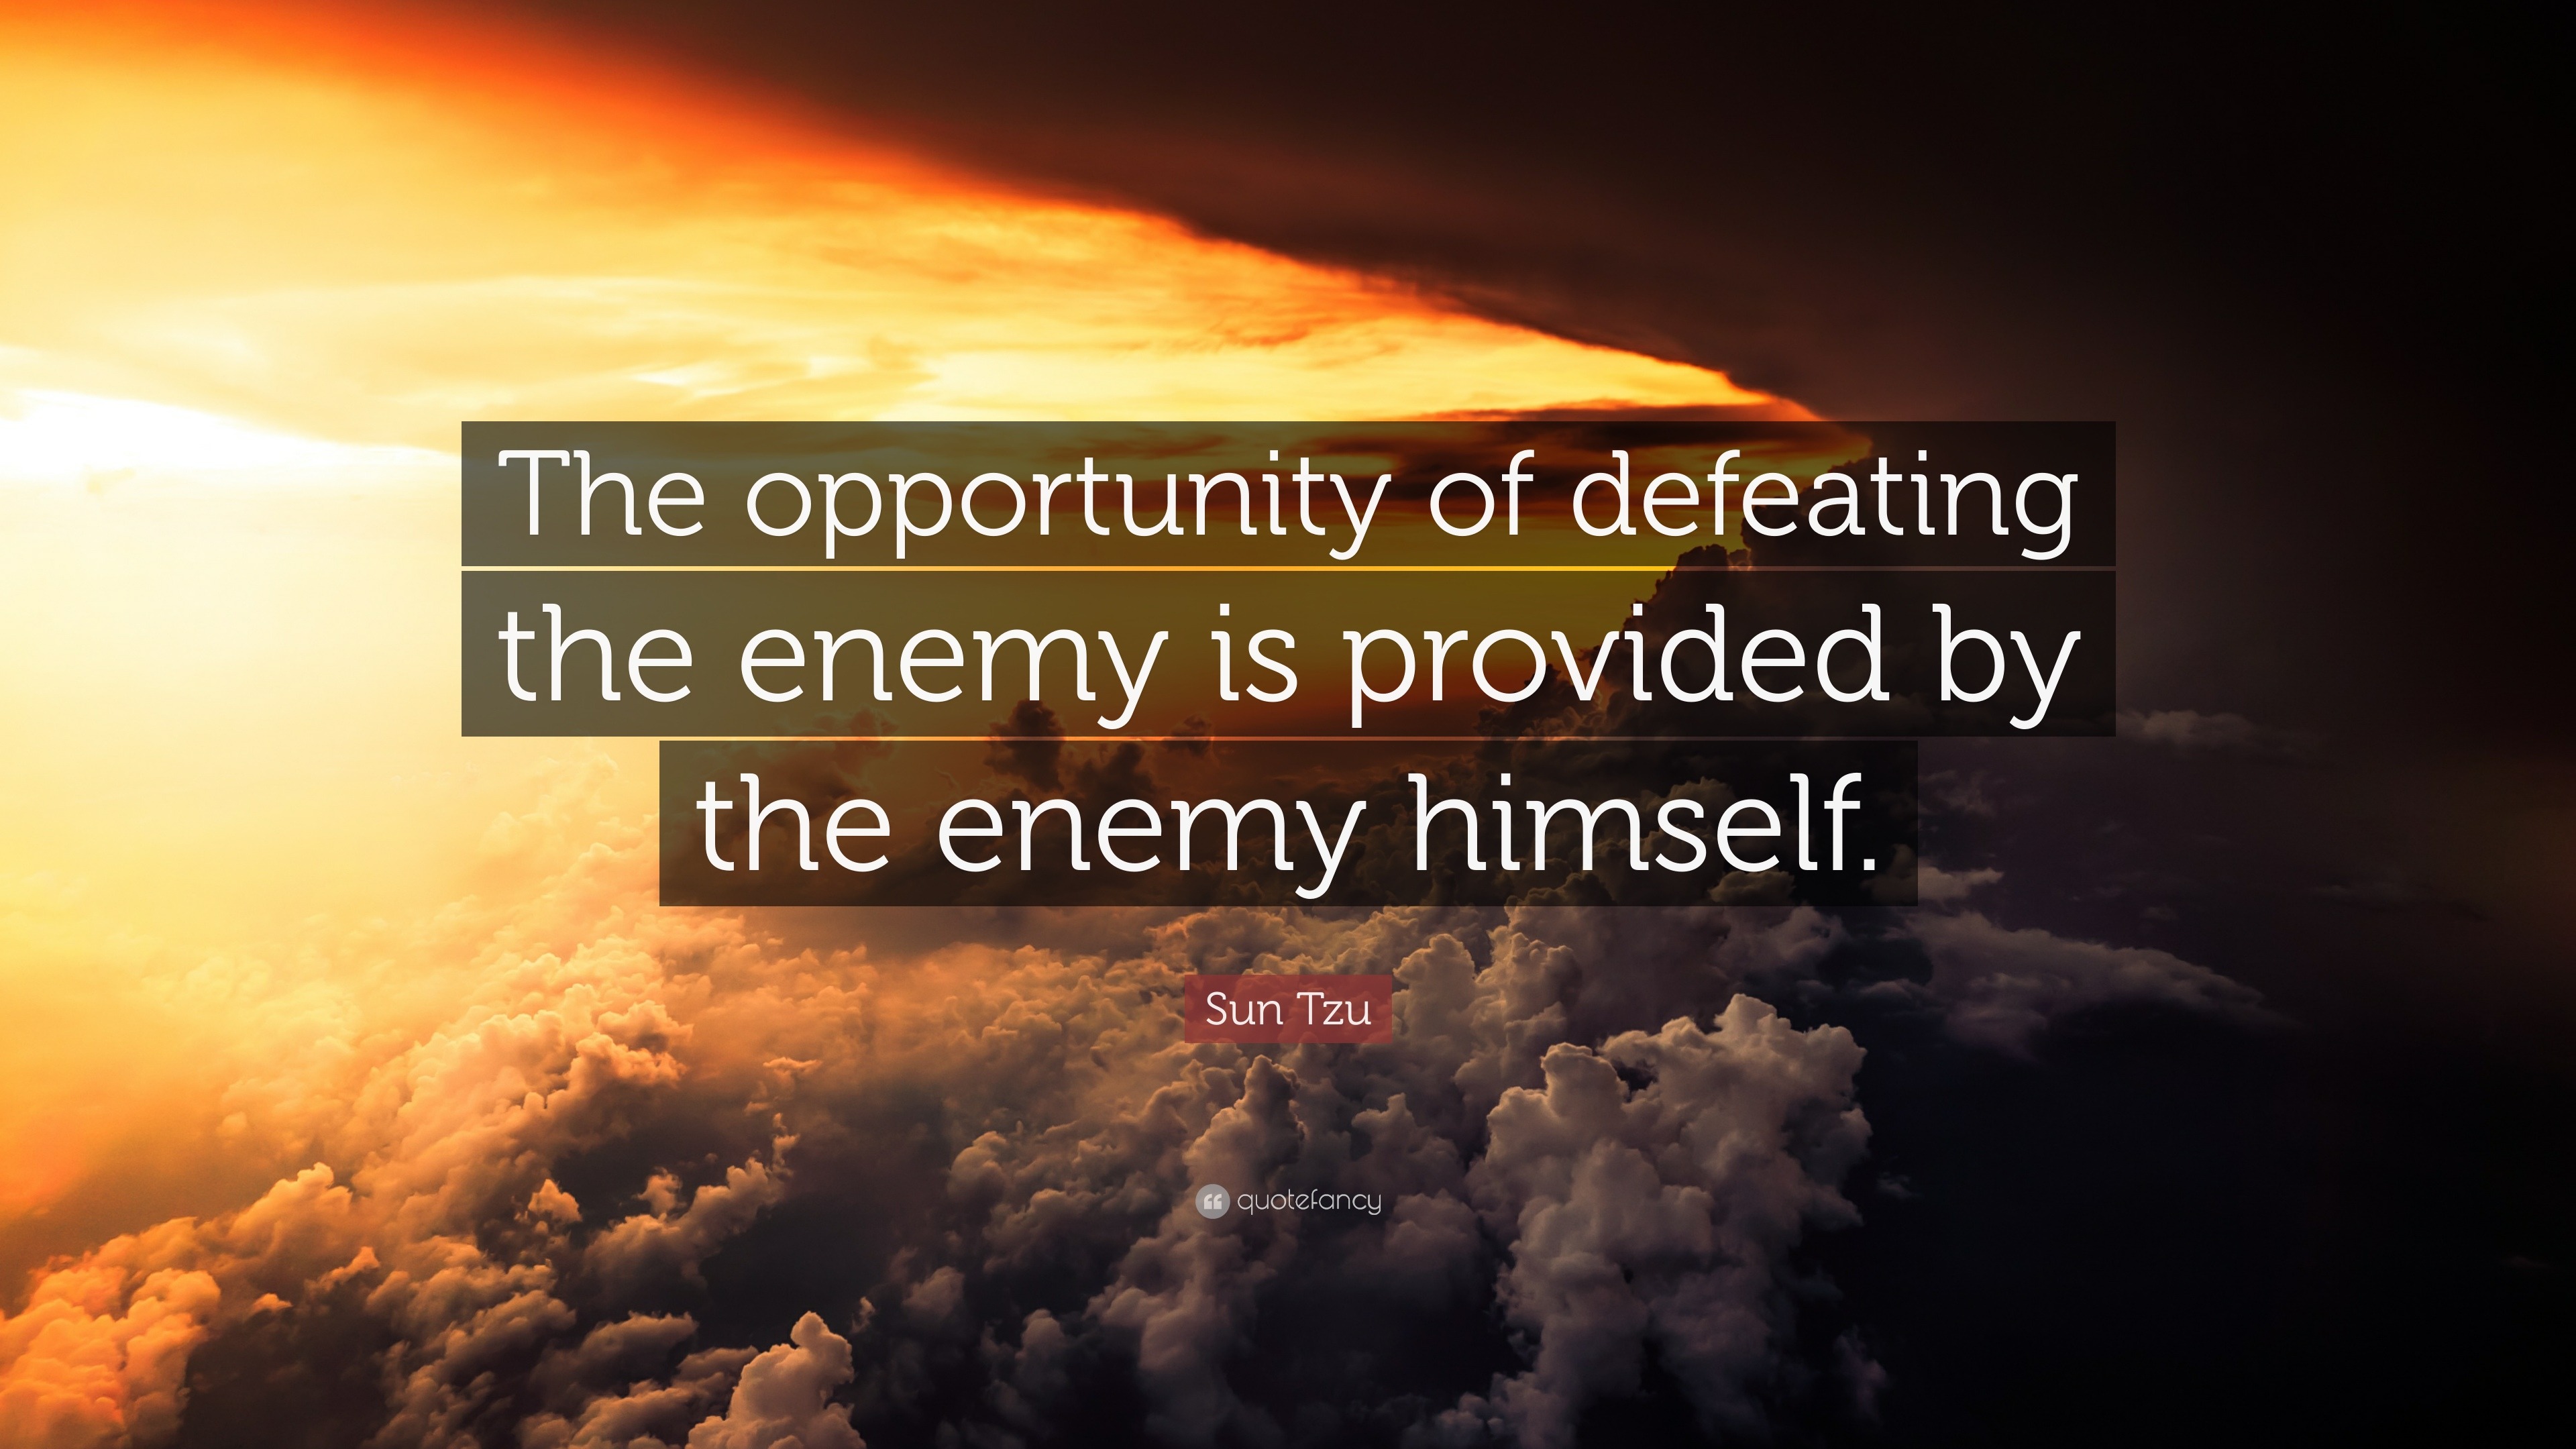 Sun Tzu Quote: “The opportunity of defeating the enemy is provided by